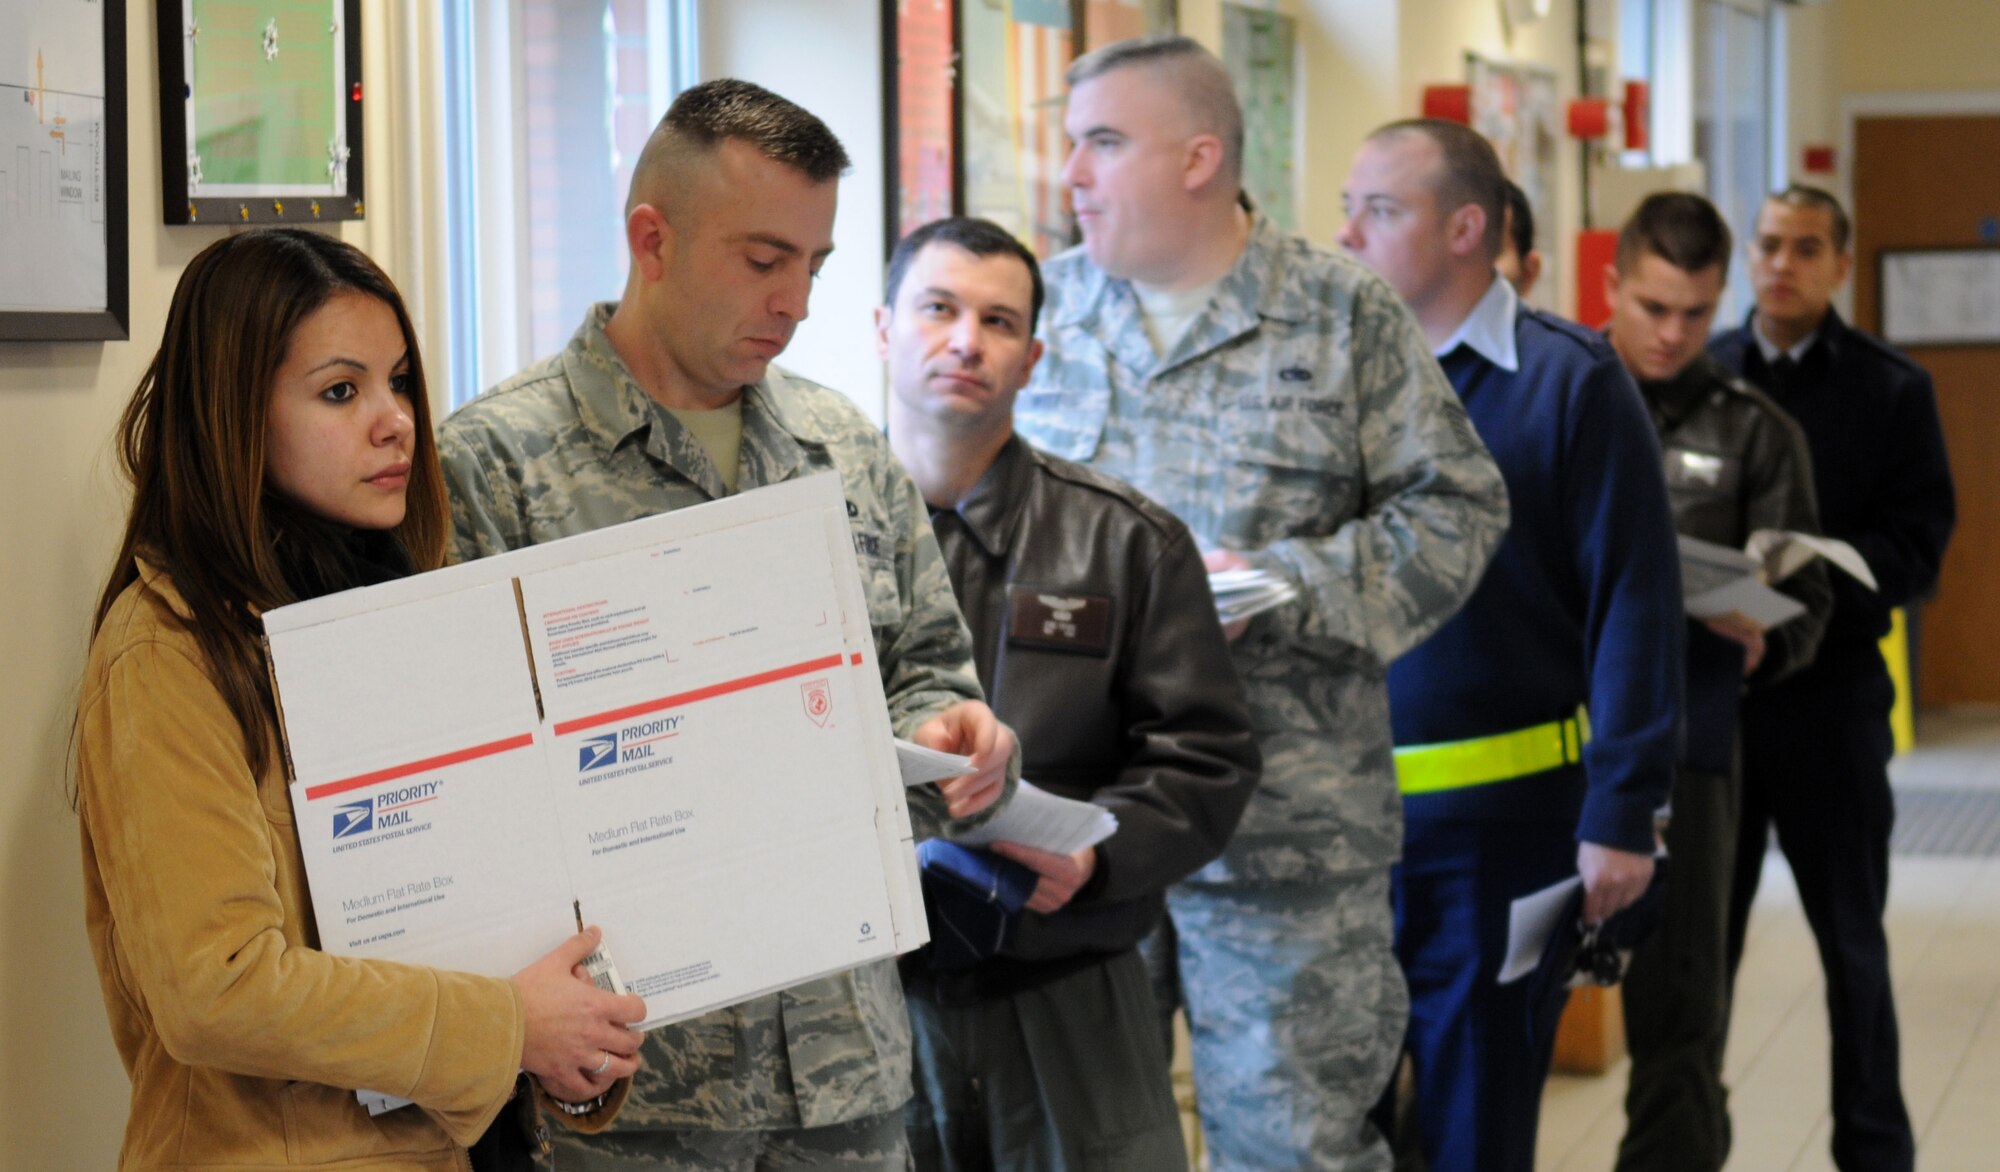 RAF MILDENHALL, England – Customers wait in line at the military post office pick-up window to retrieve packages Dec. 14. Customers can experience long lines and wait times during the afternoon rush which normally occurs from 11 a.m. to 1 p.m.  The post office has extended hours of operation with outgoing mail opening at 8:30 a.m. to 5 p.m. Monday through Friday and 9 a.m. to 1 p.m. Saturday. The pick-up window hours are 8 a.m. to 6 p.m Monday through Friday and 9 a.m to 1 p.m. Saturday. The post office will resume normal business hours Dec. 28. (U.S. Air Force photo/ Staff Sgt. Jerry Fleshman)